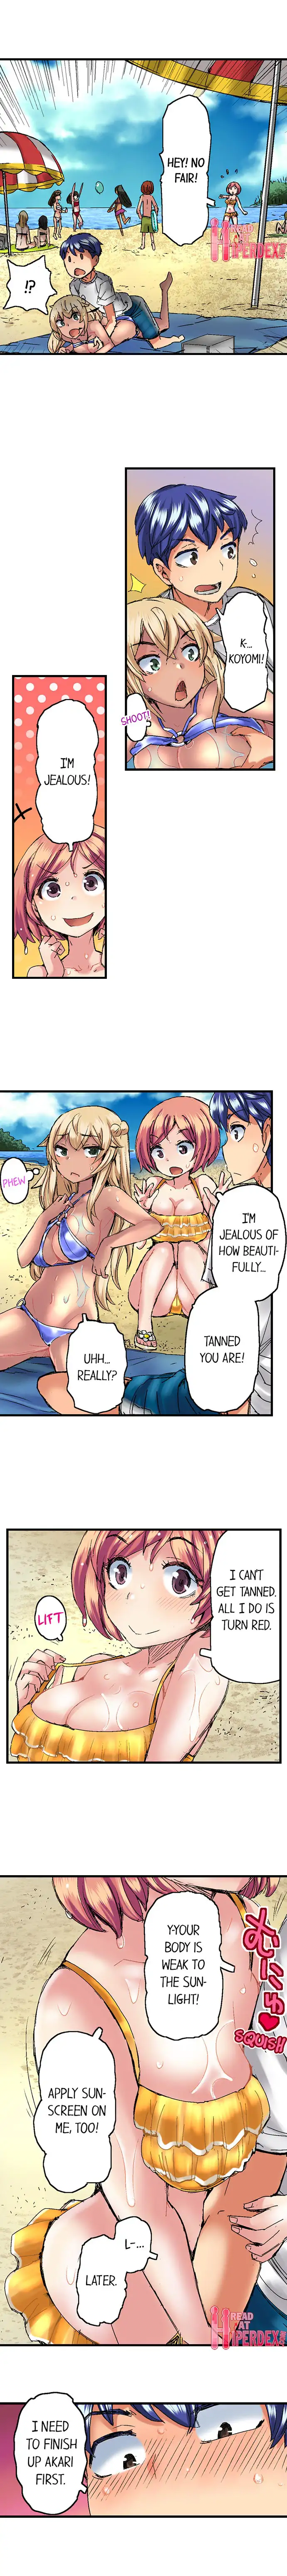 Taking a Hot Tanned Chick’s Virginity - Chapter 8 Page 6